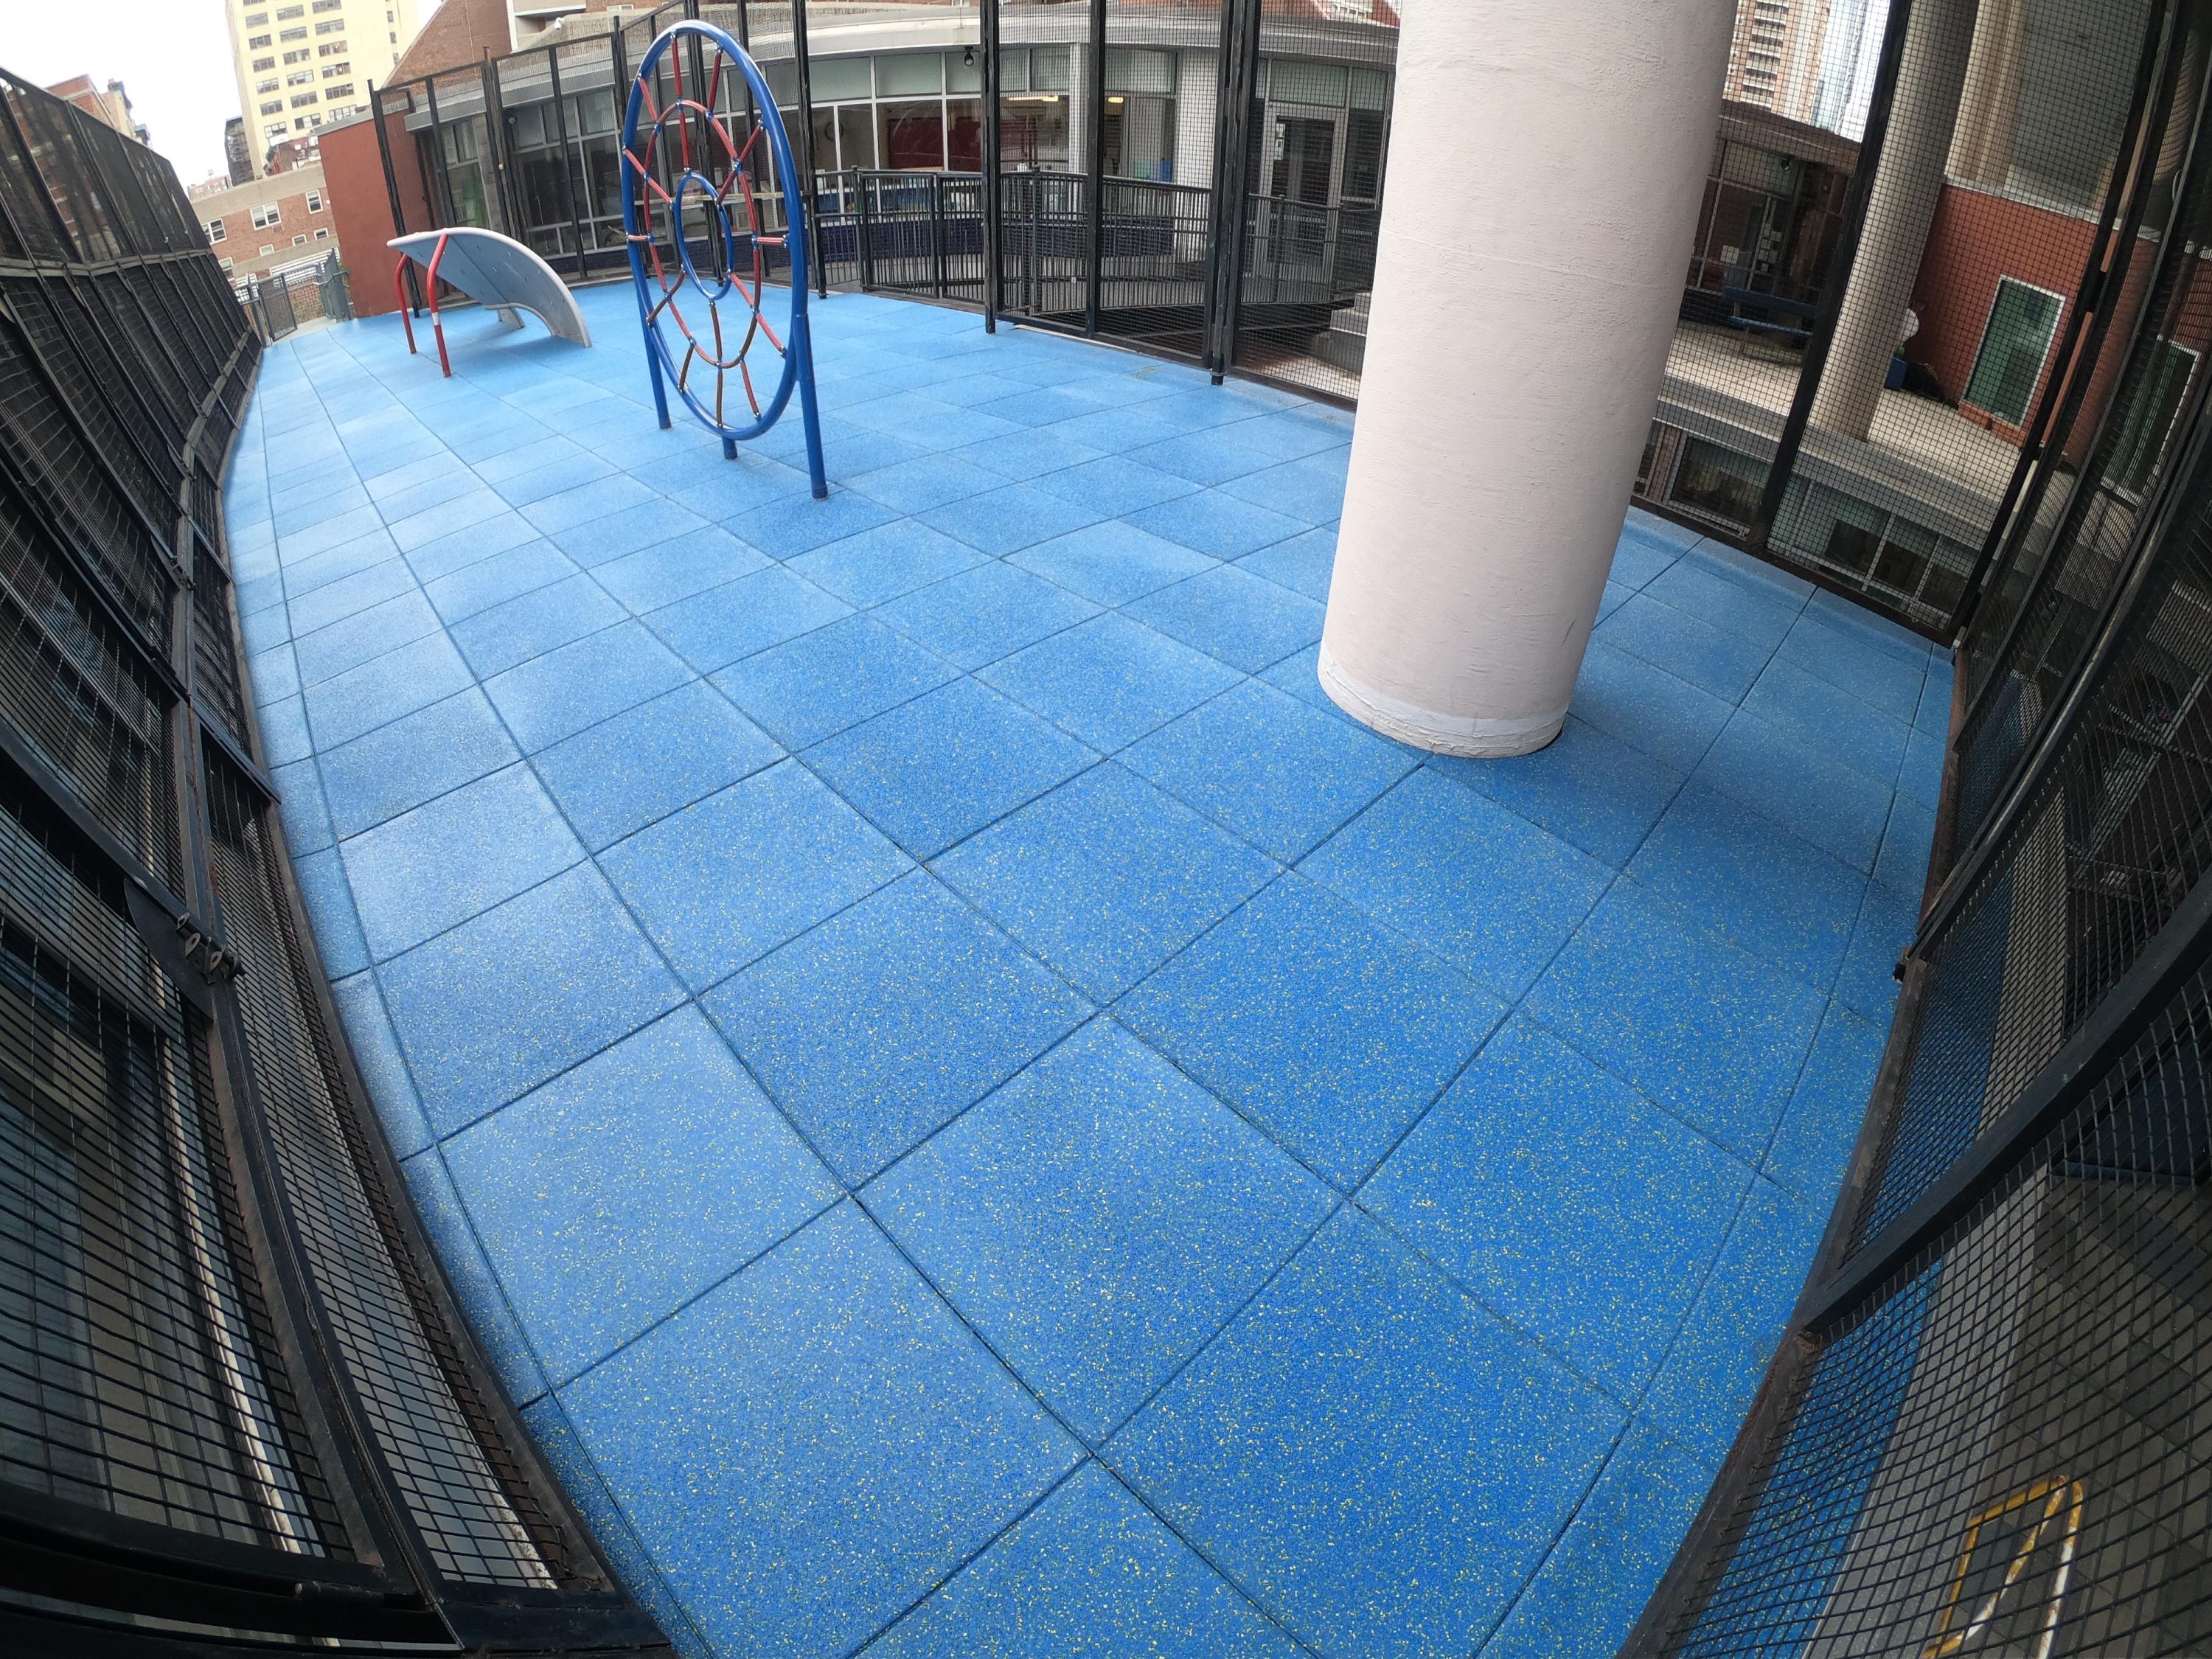 150 MPH Wind Resistant Rubber Pavers For Rooftop Playground